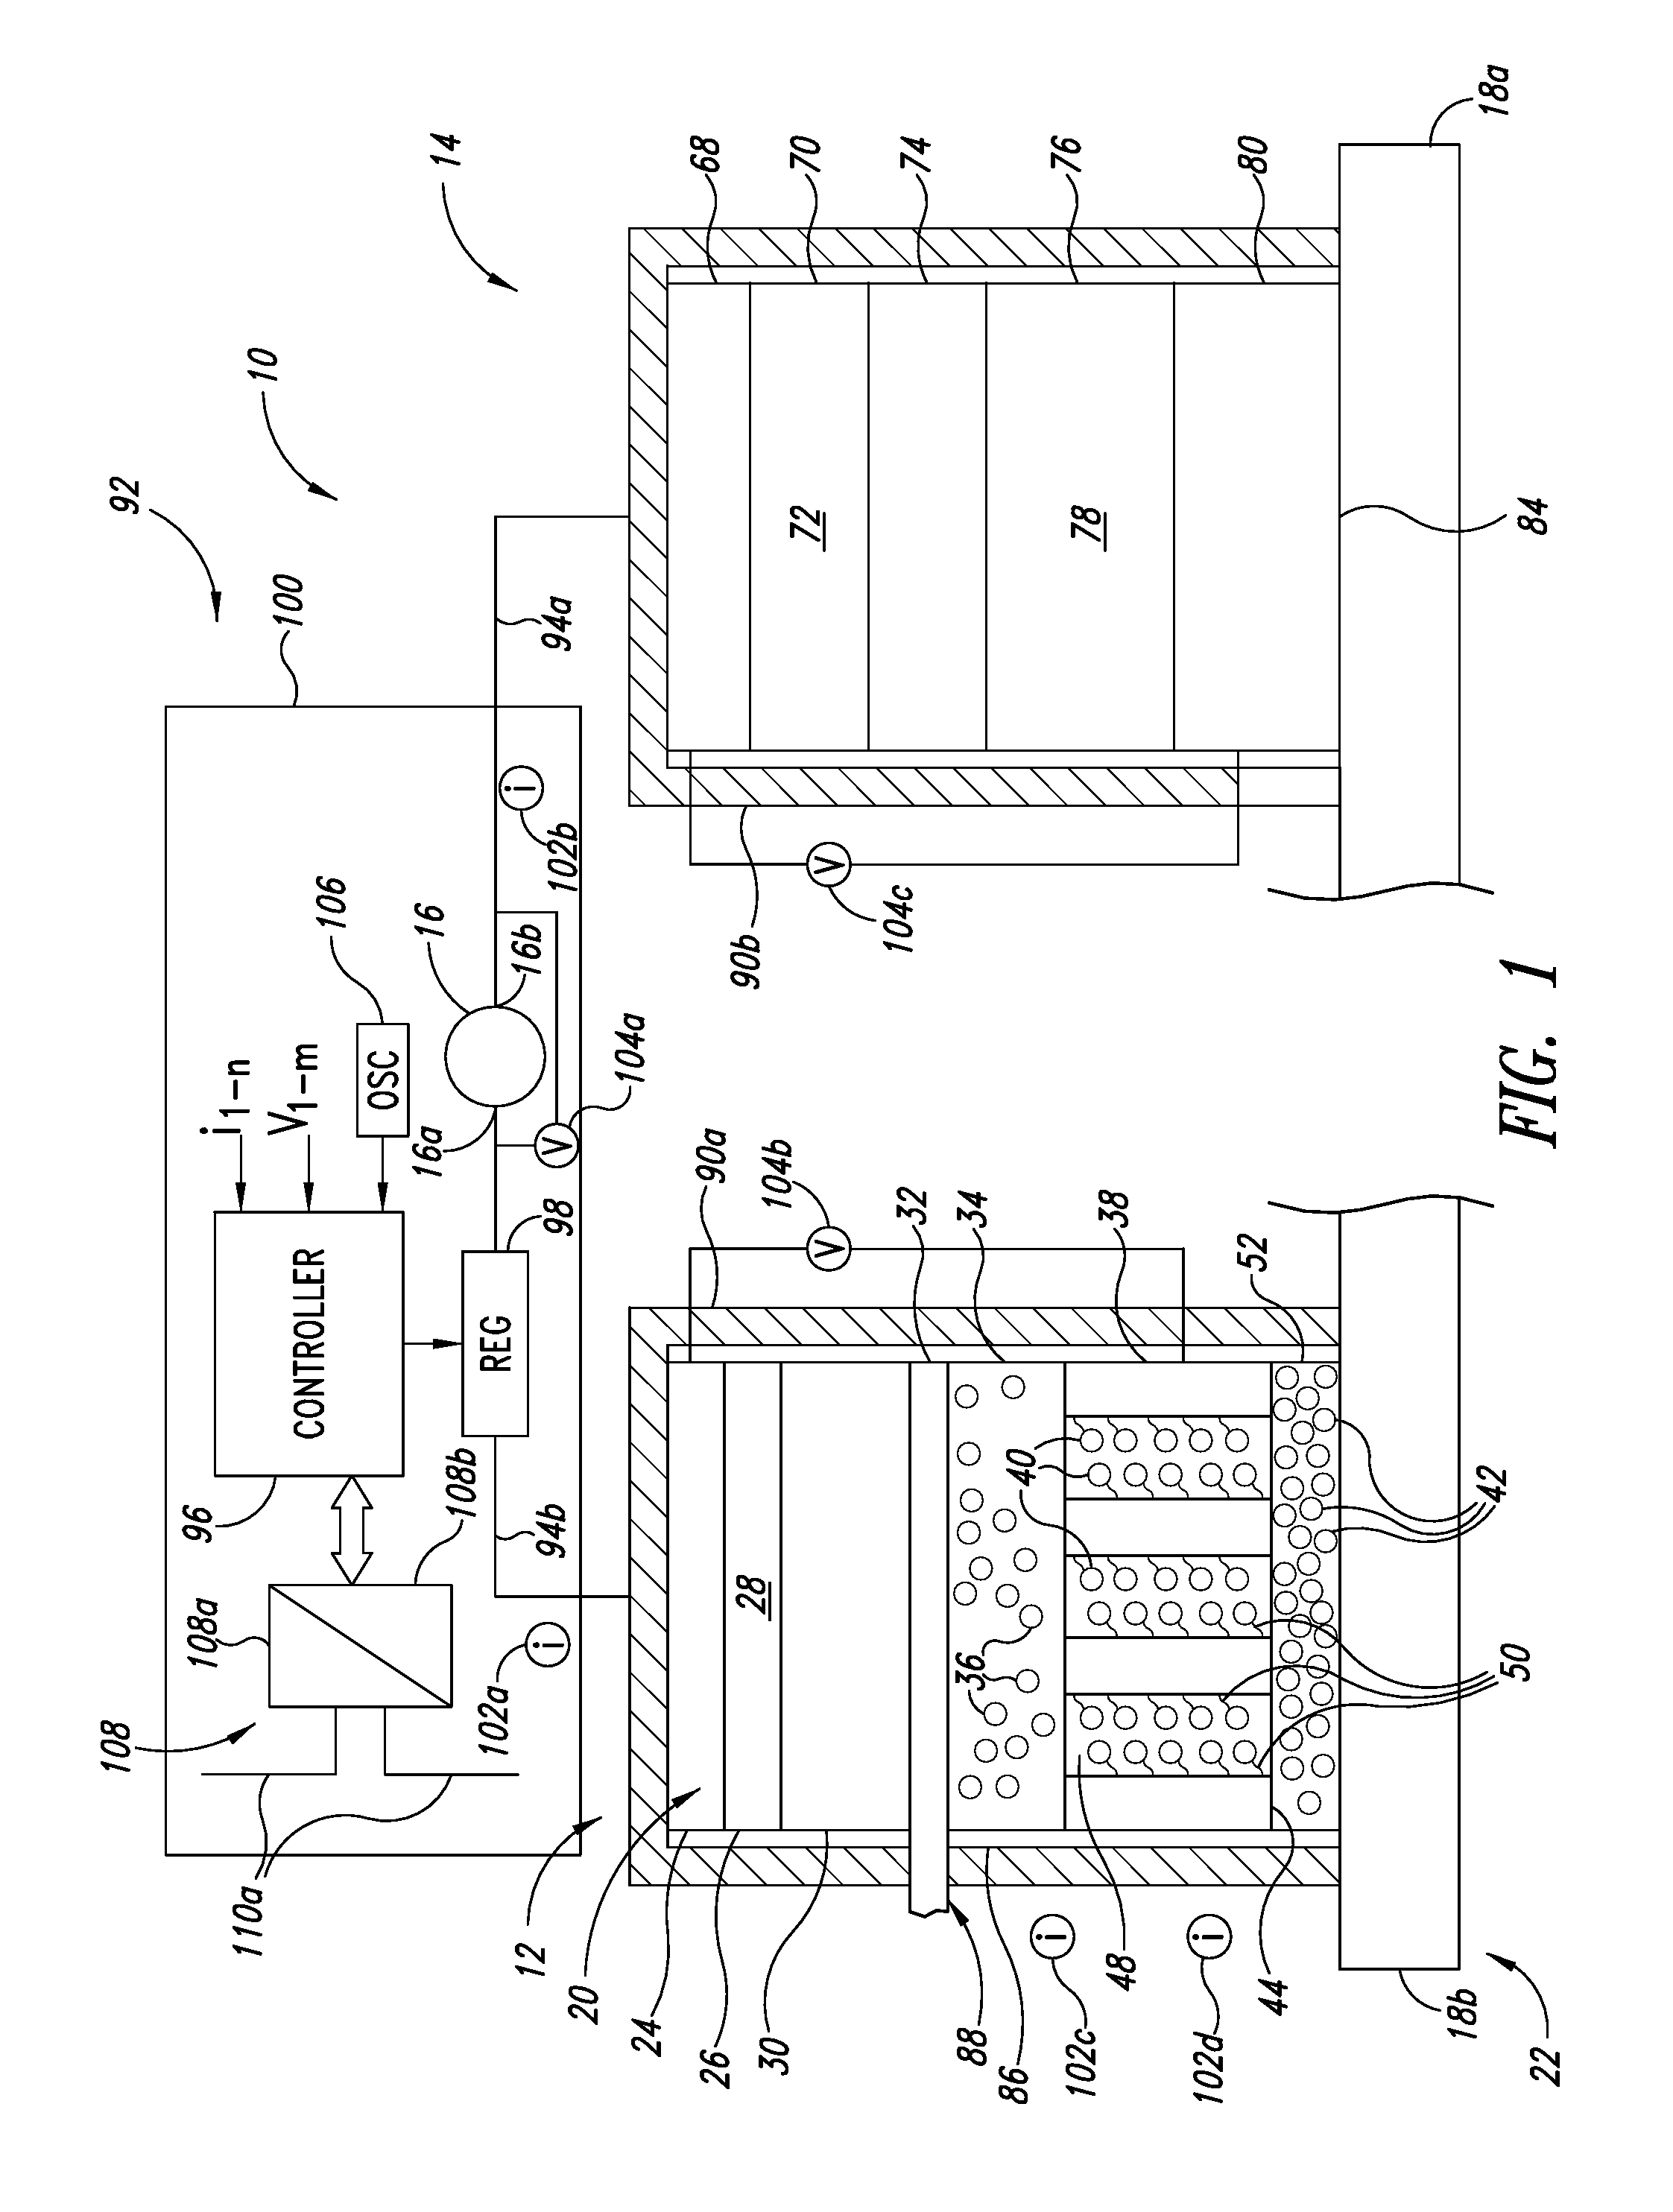 Synchronization apparatus and method for iontophoresis device to deliver active agents to biological interfaces